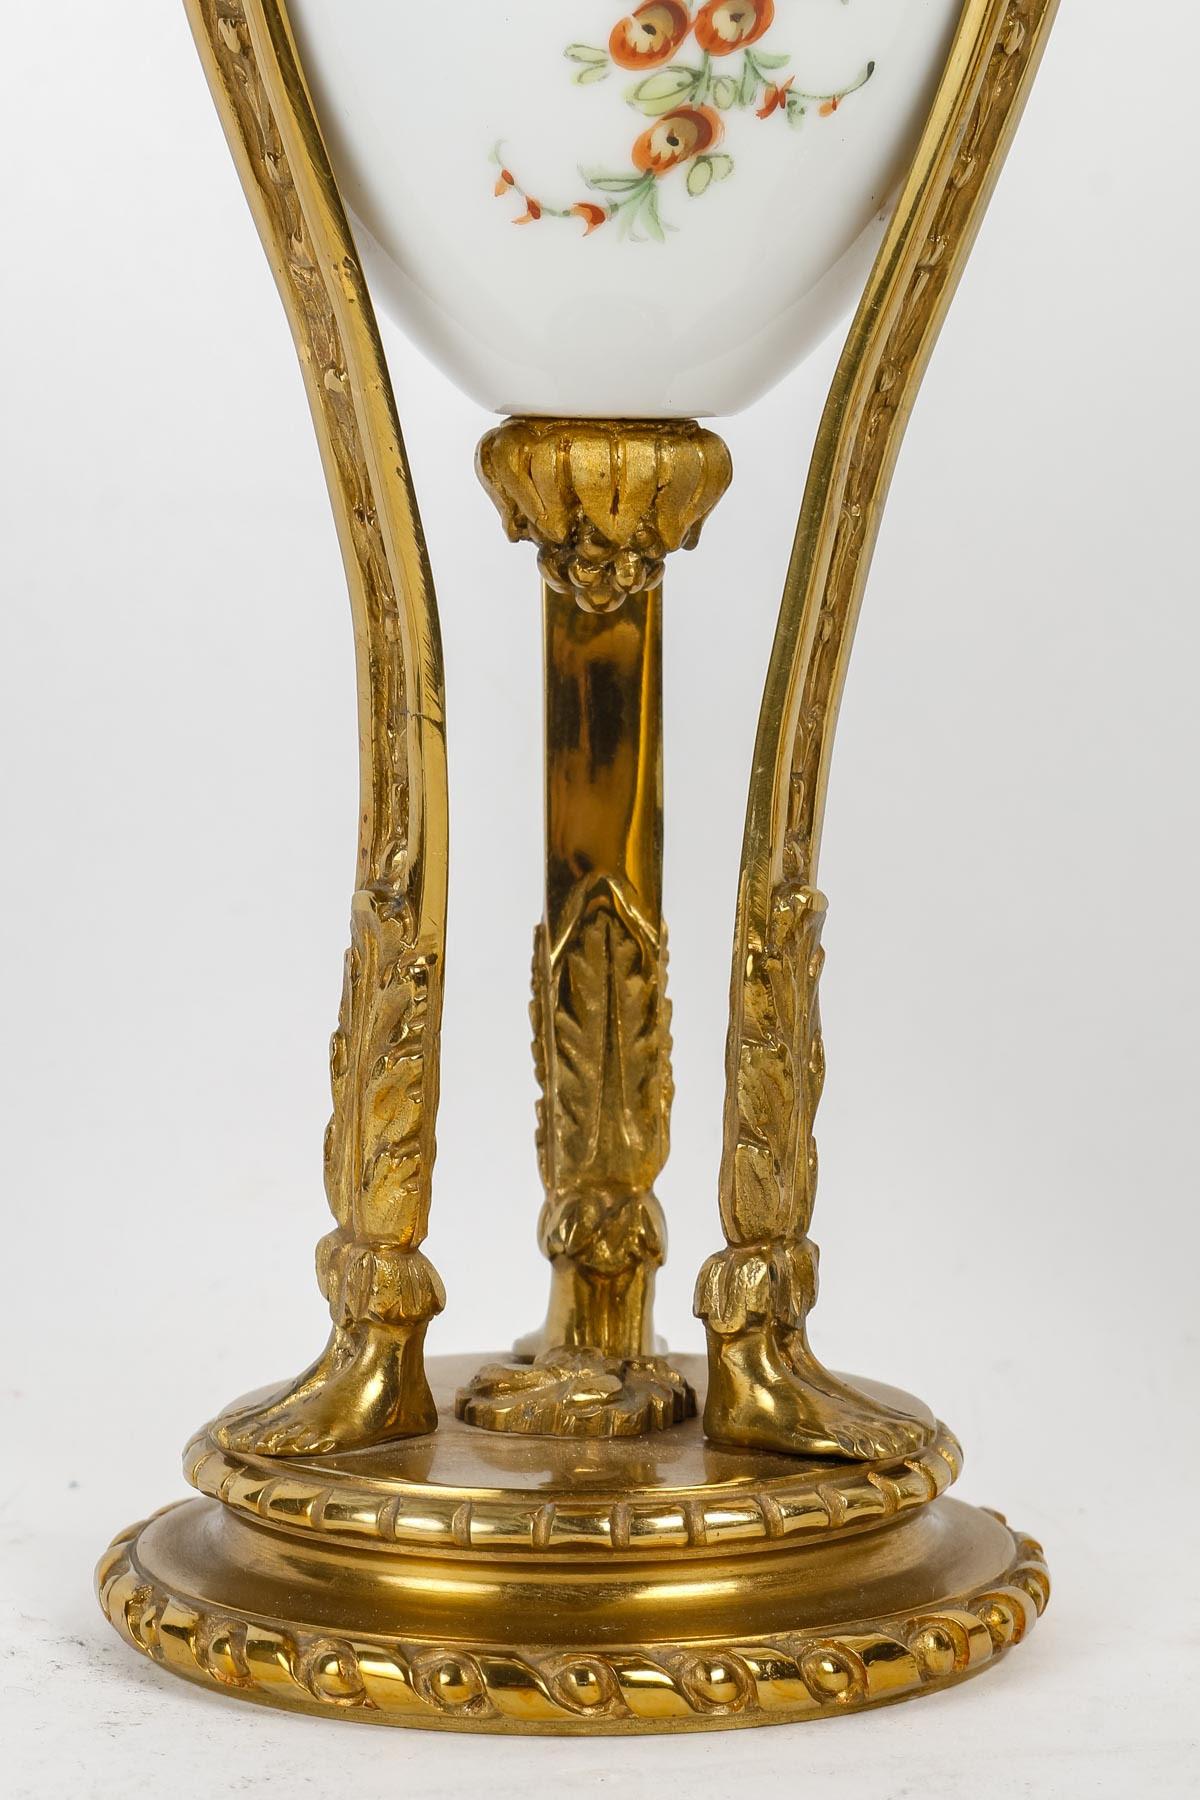 Gilt Pair of Perfume Burners from the Manufacture de Sèvres, Early 20th Century.